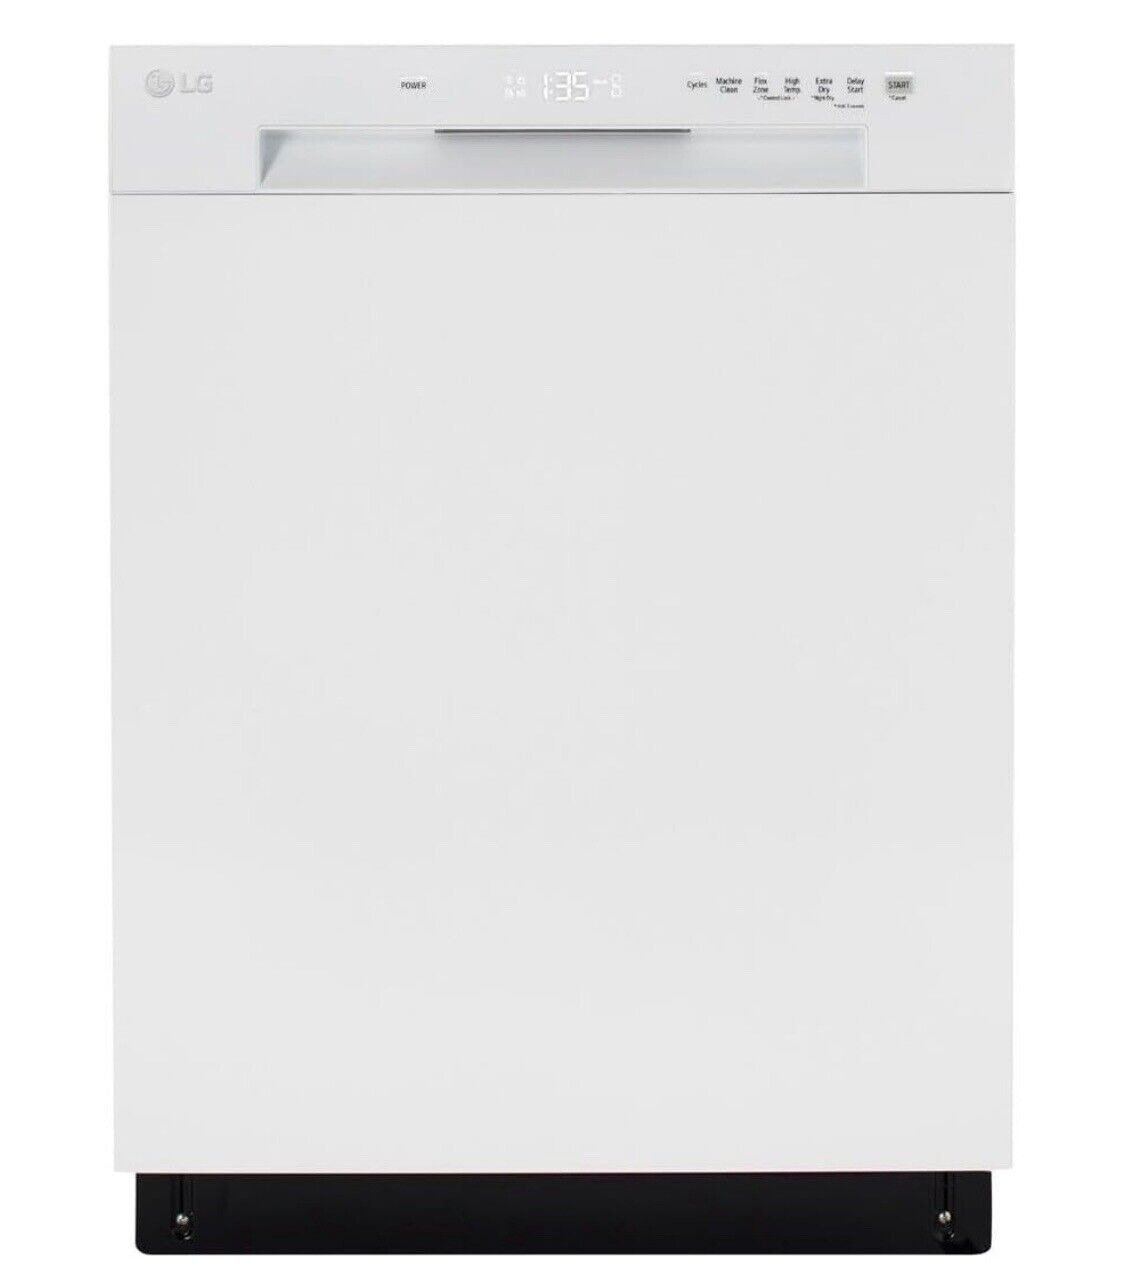 LG 24-Inch Front Control Dishwasher with SenseClean in White - LDFC2423W Sealed